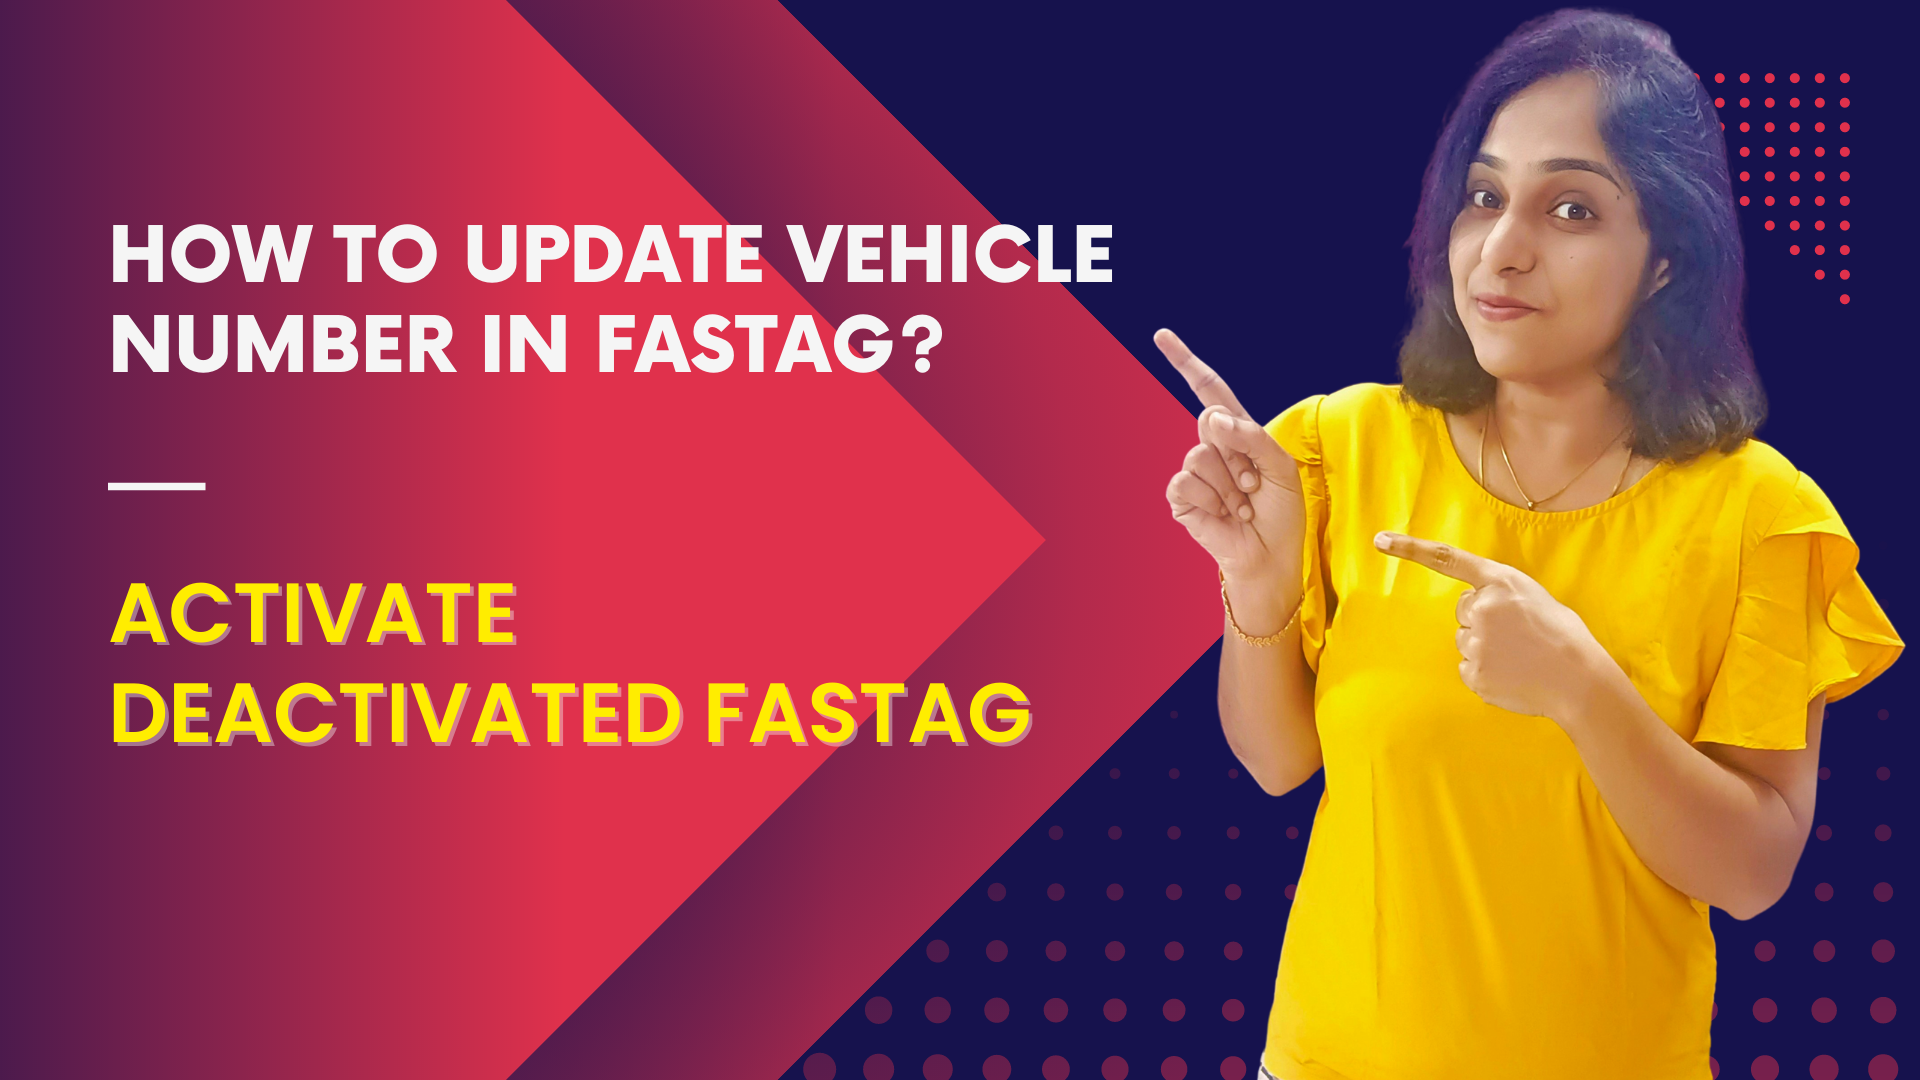 How To Update Vehicle Number In Fastag | Avoid Fastag Getting Inactive | Activate Deactivated Fastag